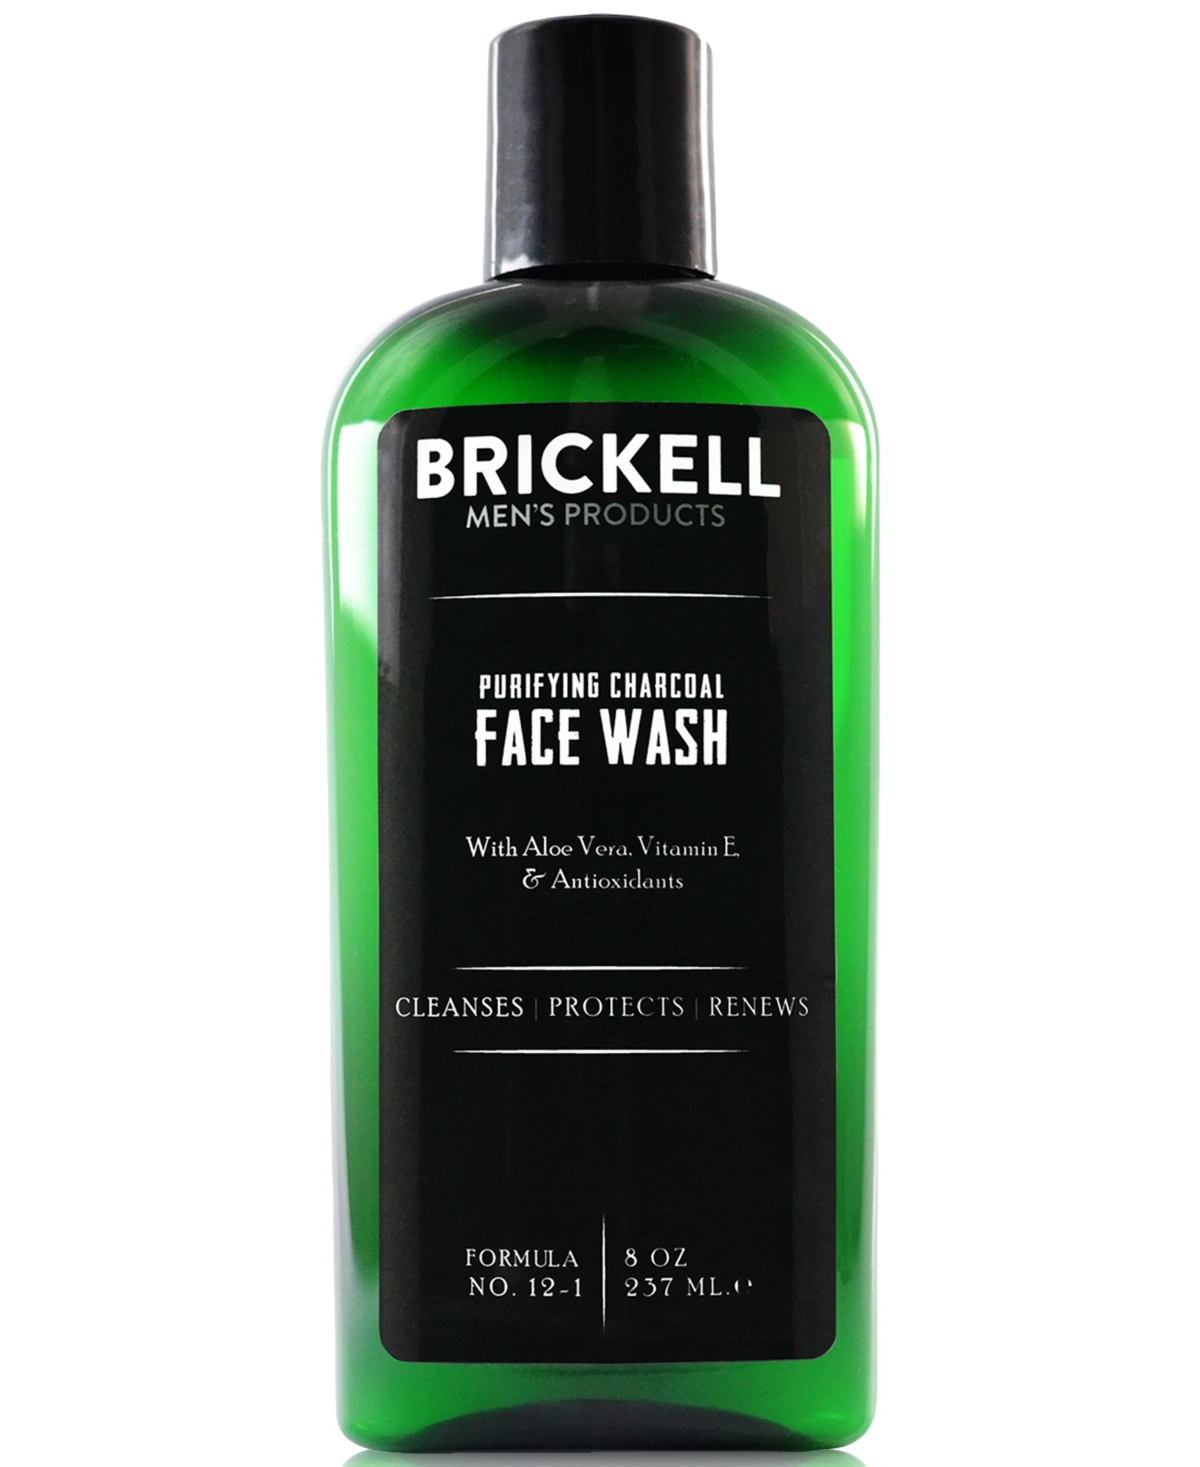 Brickell Mens Products Brickell Men's Products Purifying Charcoal Face Wash, 8 Oz.